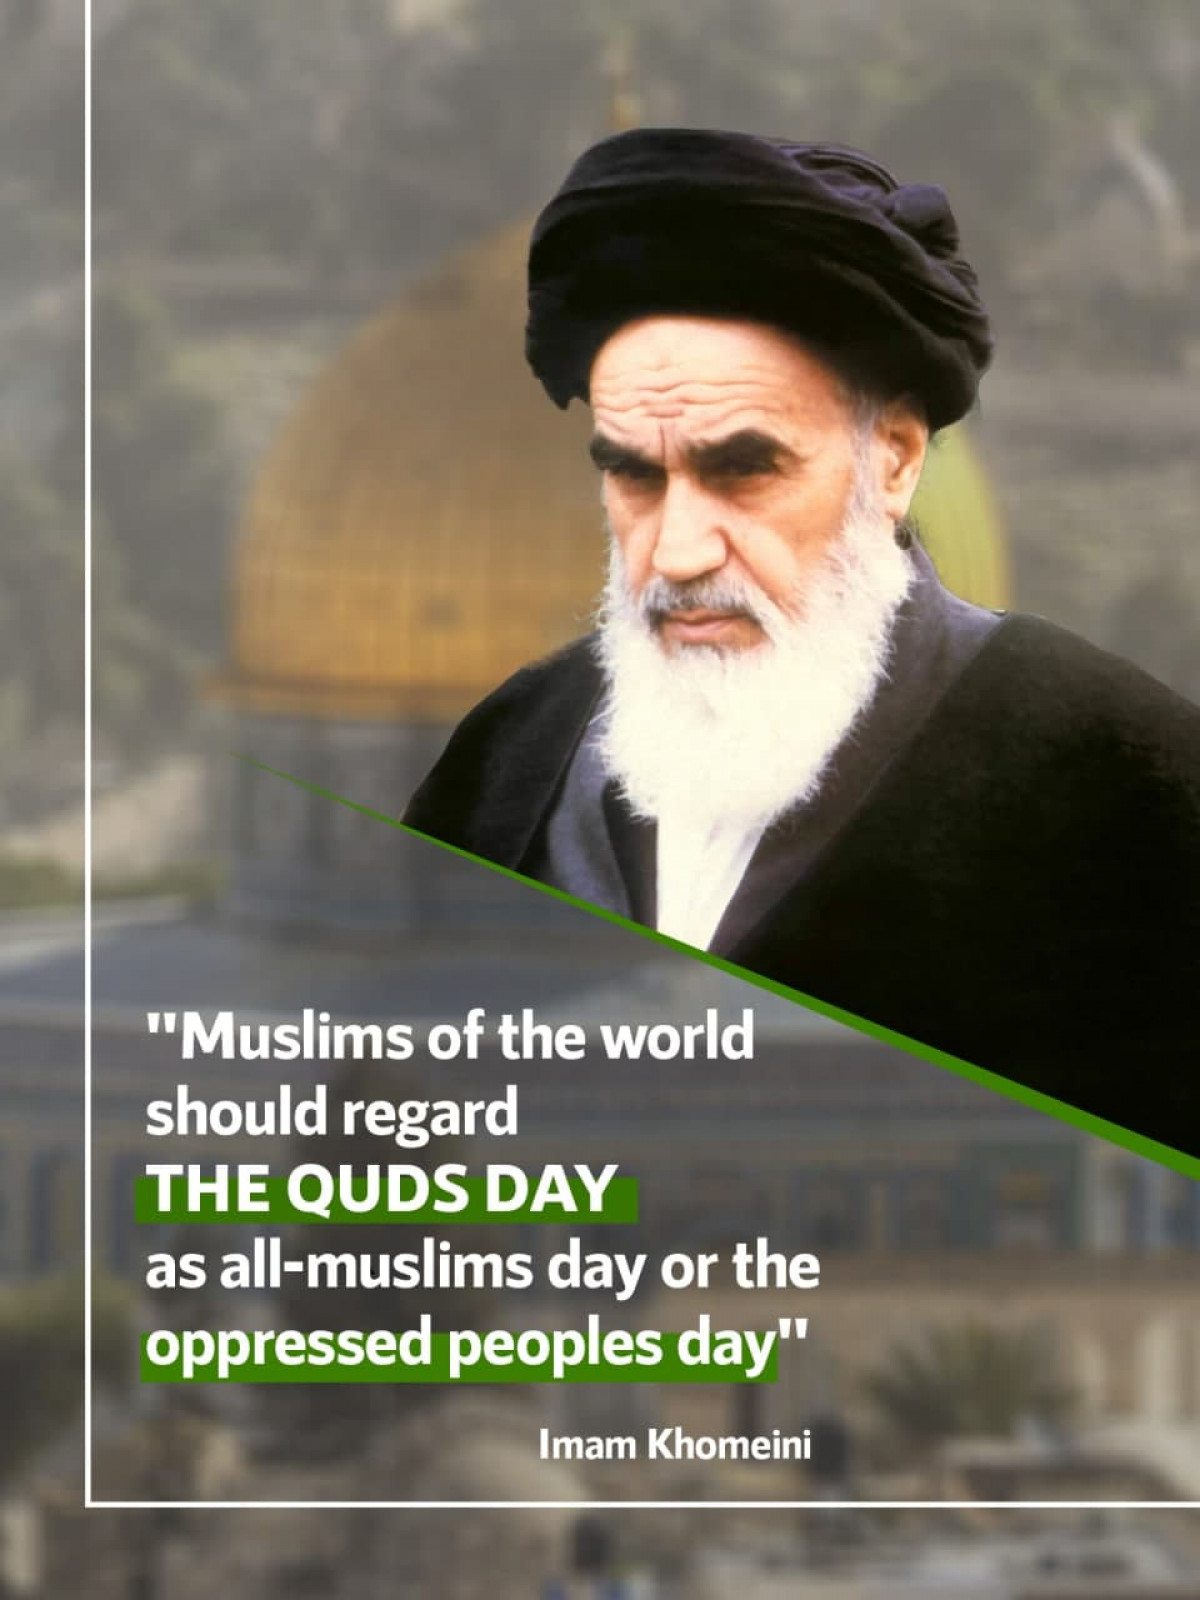 Muslims of the world should regard the quds day as all-muslims day or the oppressed peoples day